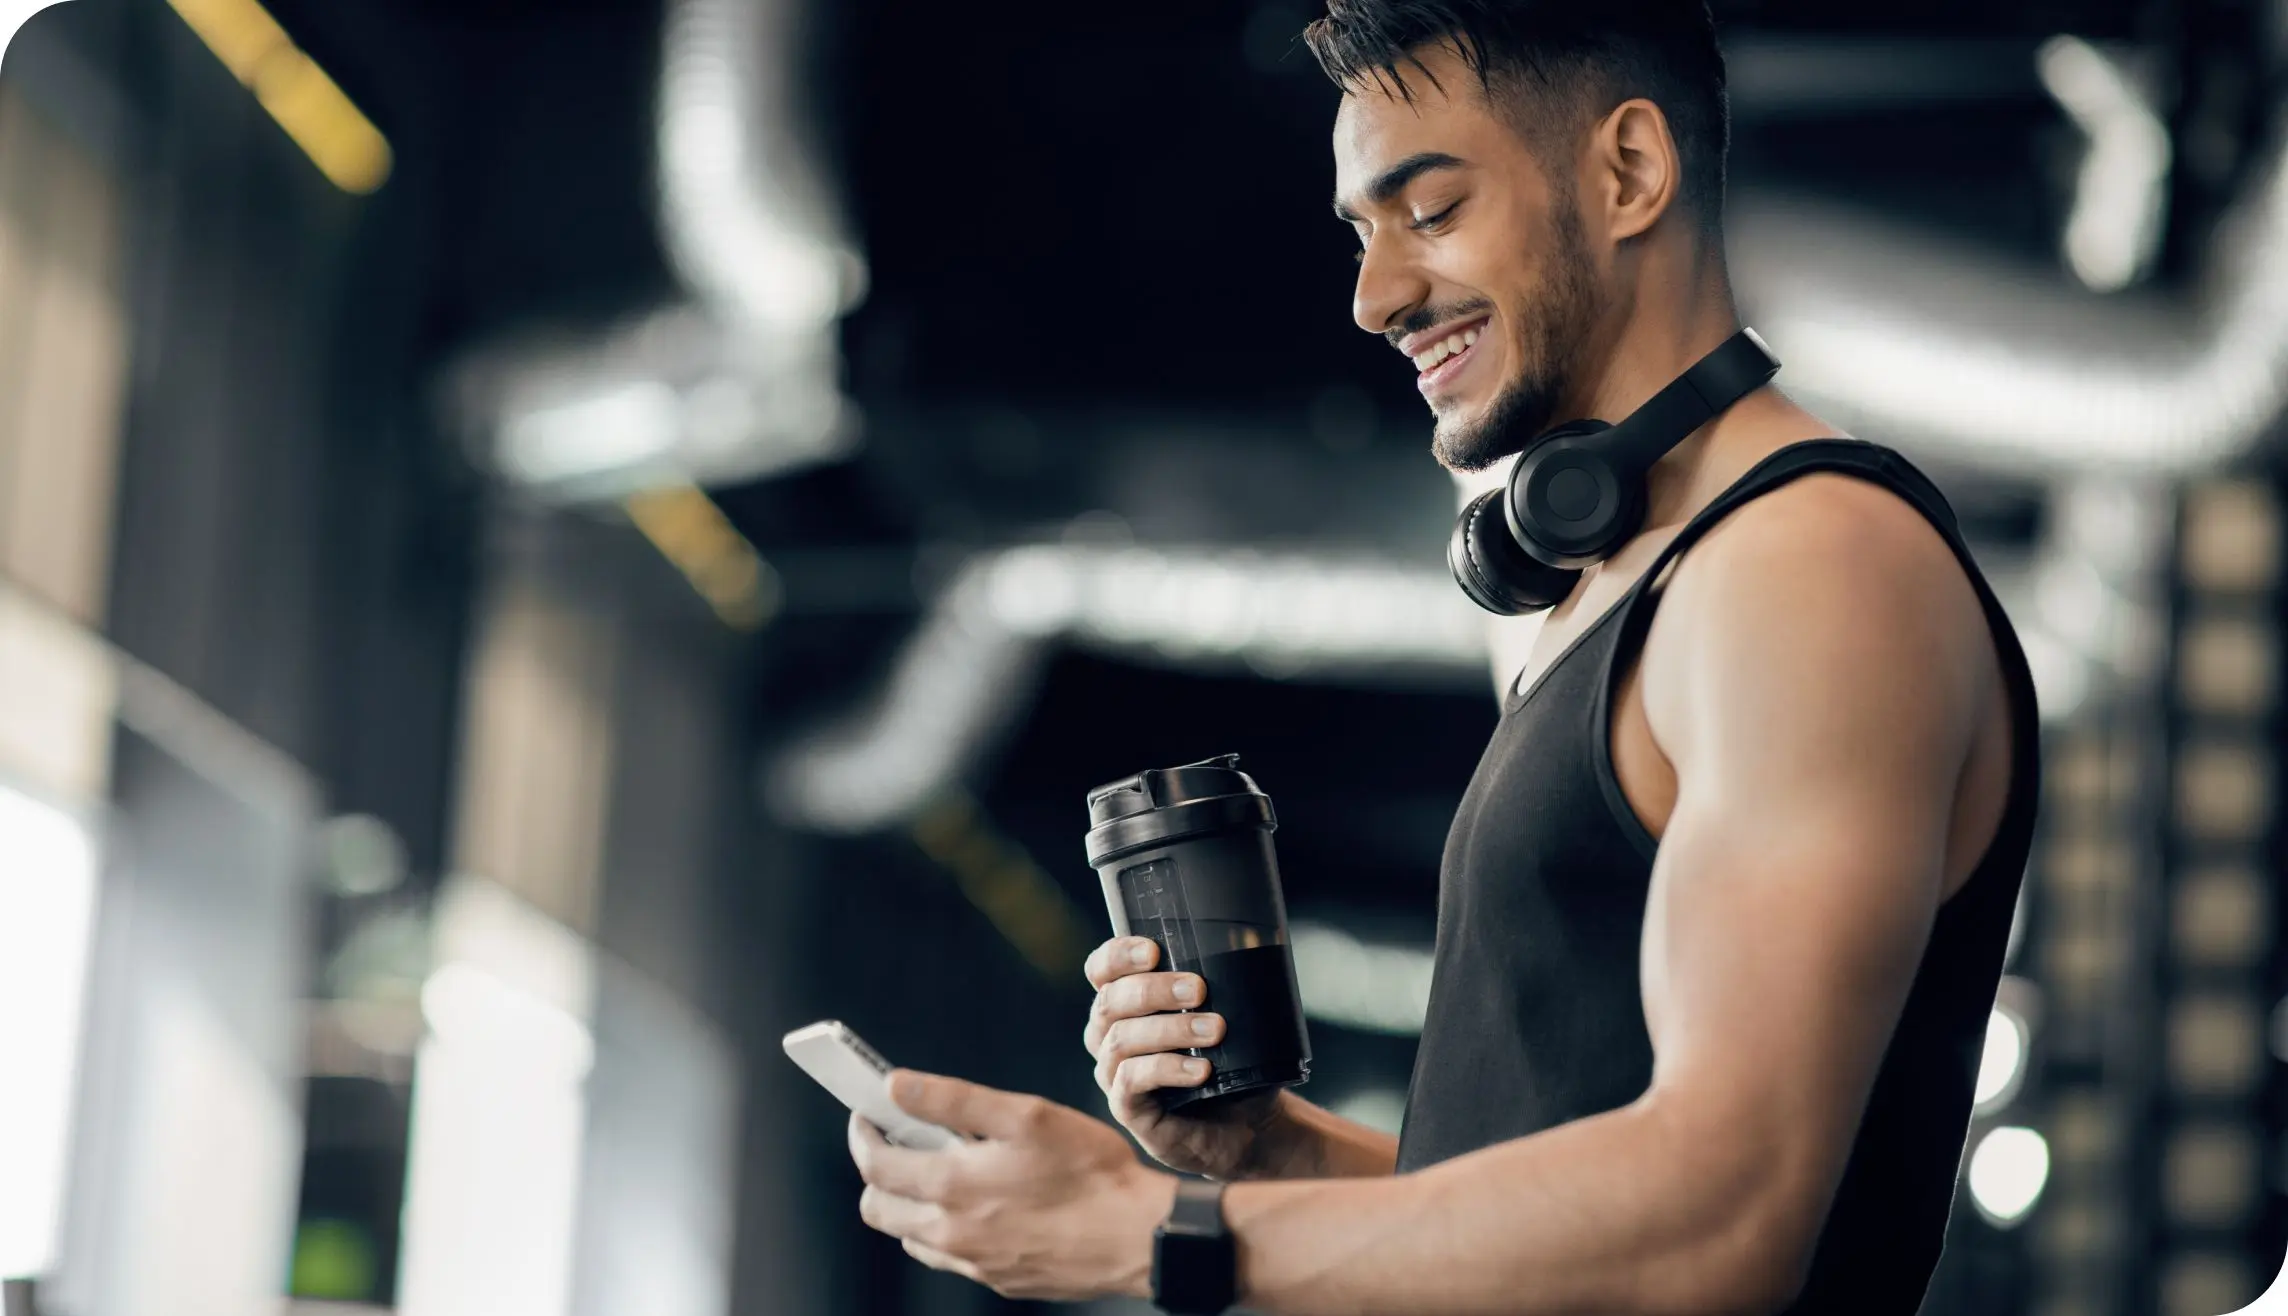 Image of man in workout gear checking mobile phone